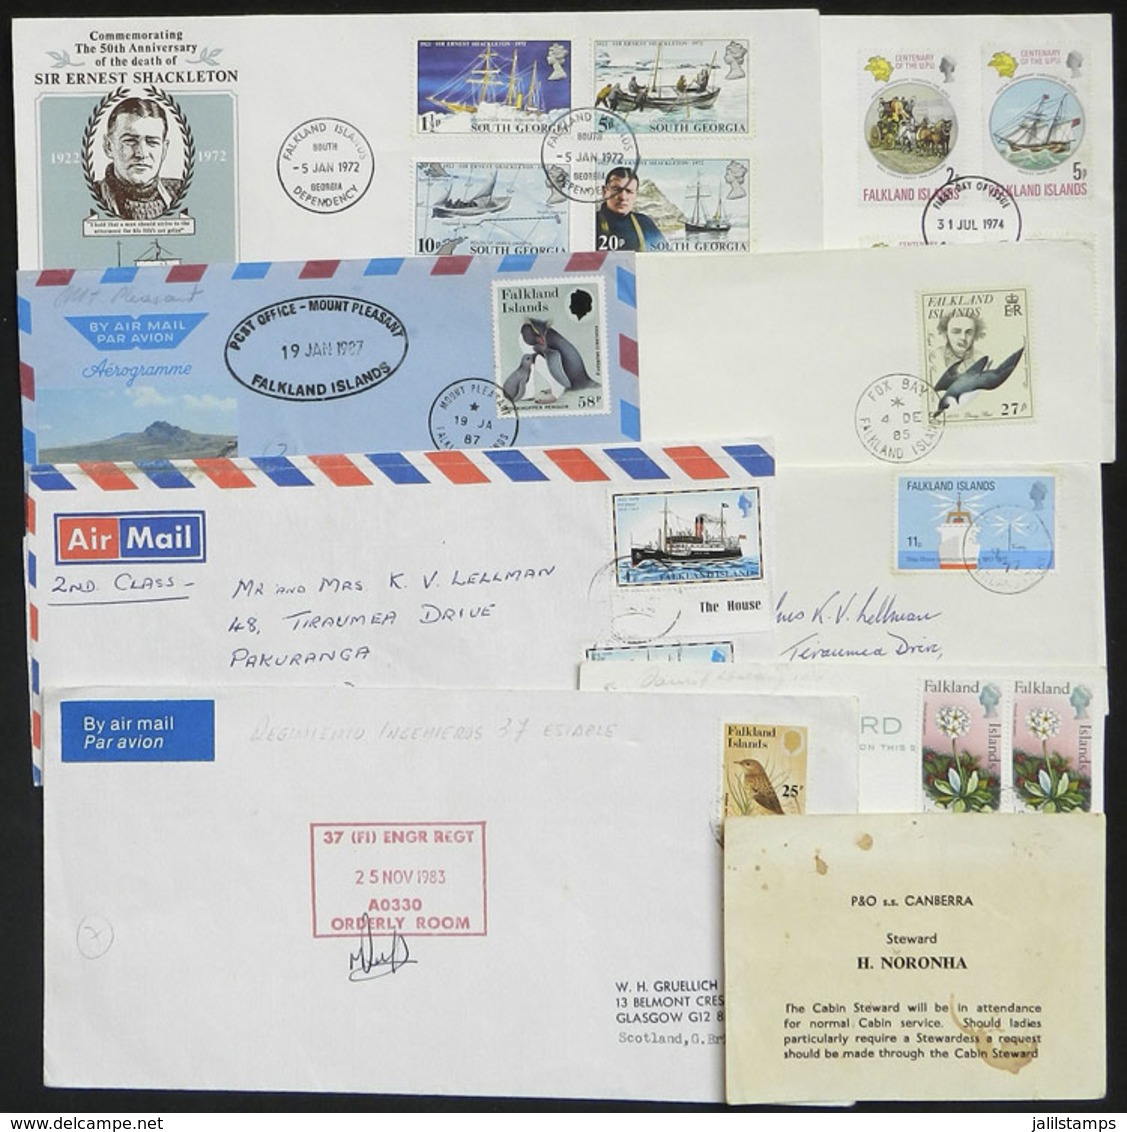 FALKLAND ISLANDS/MALVINAS: 8 Covers Of The Years 1974 To 1985, Also A Card Of The Ship S.S.Canberra, Good Lot! - Falklandinseln